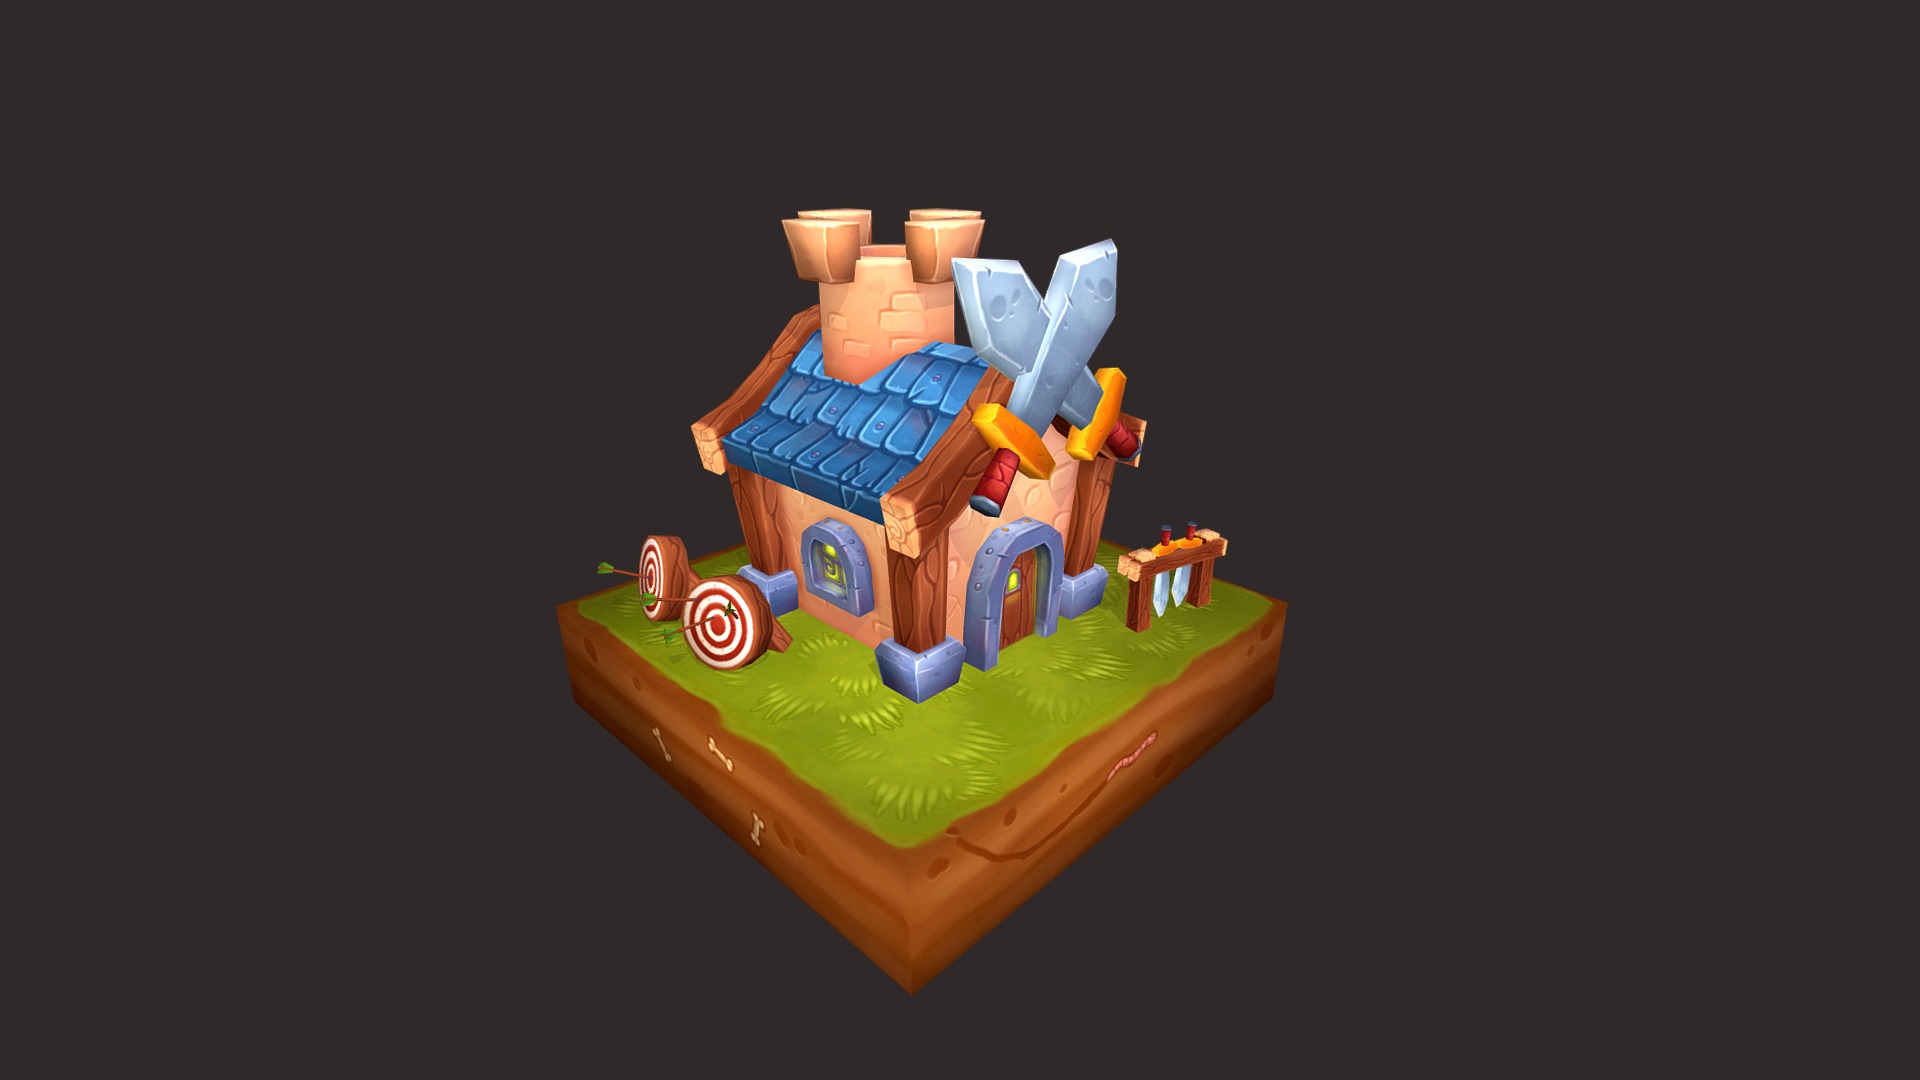 3D model Battle Village – Barracks - This is a 3D model of the Battle Village - Barracks. The 3D model is about a colorful cake with a blue theme.